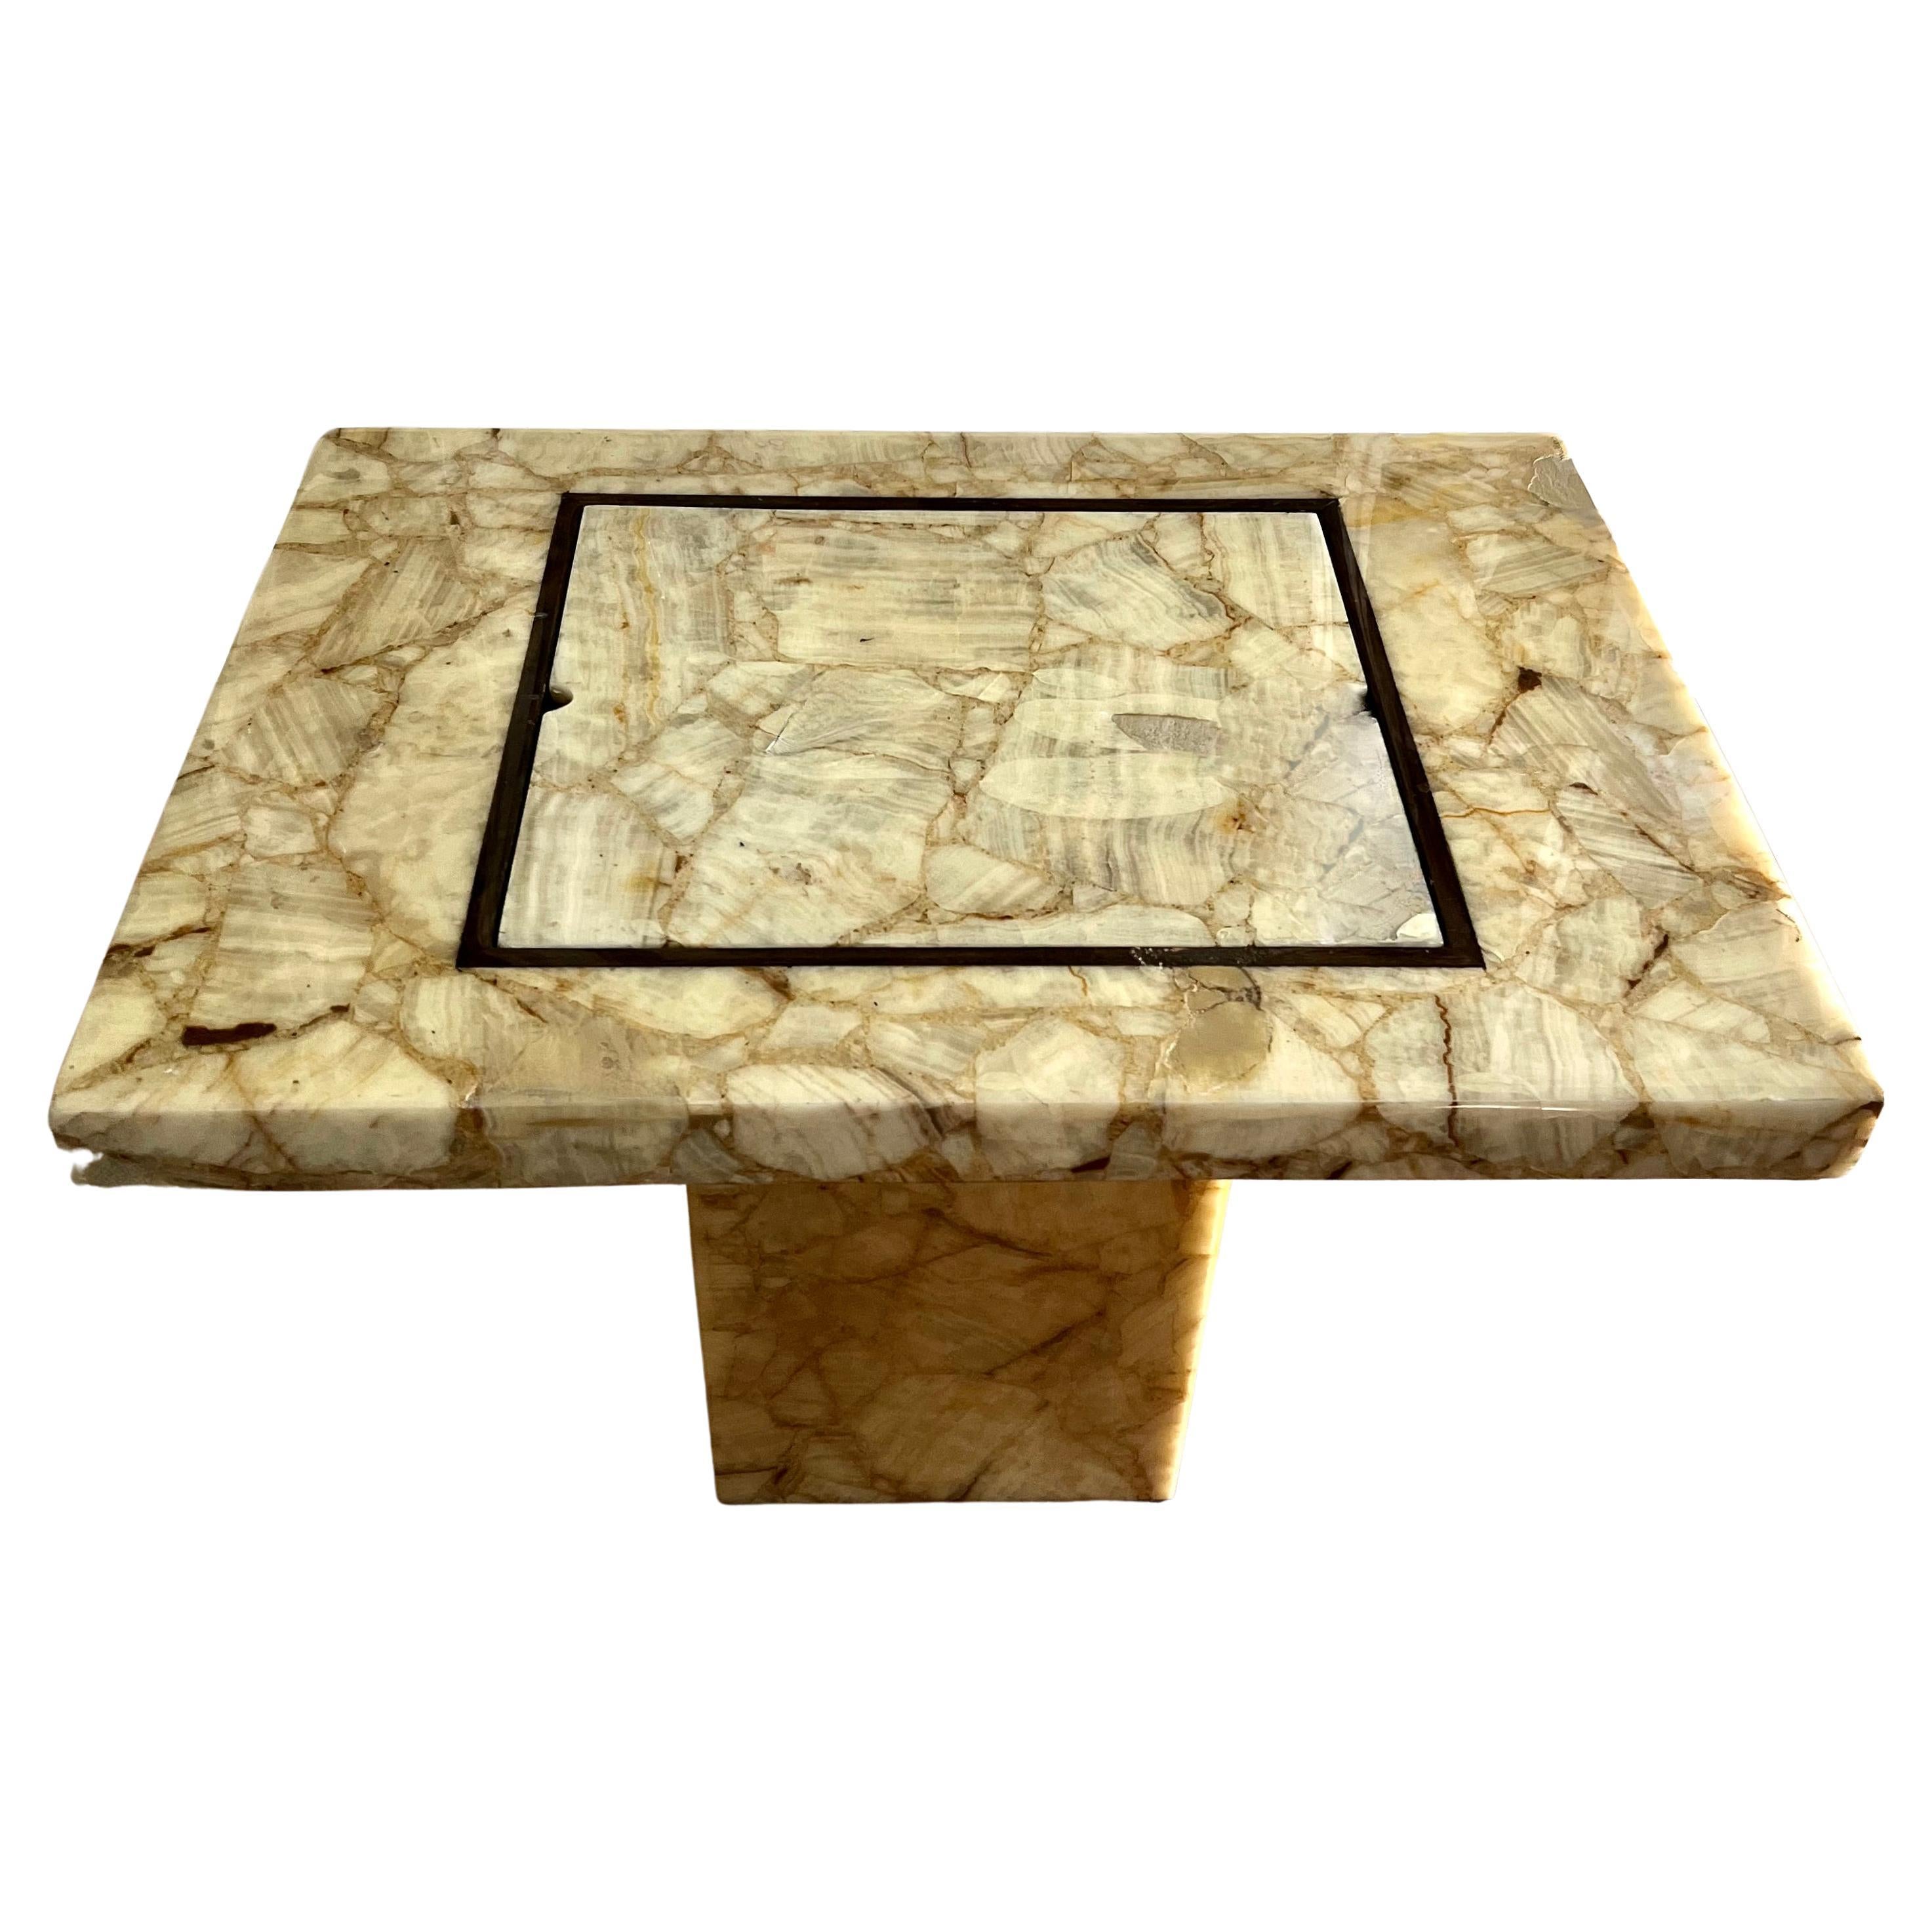 A very special and rare game table by Arturo Pani for Mueller's of Mexico. The piece was manufactured in the 1960's and is all hand crafted. The Onyx has a thick resin coating that gives the piece a very deep shine and protects it from elements.